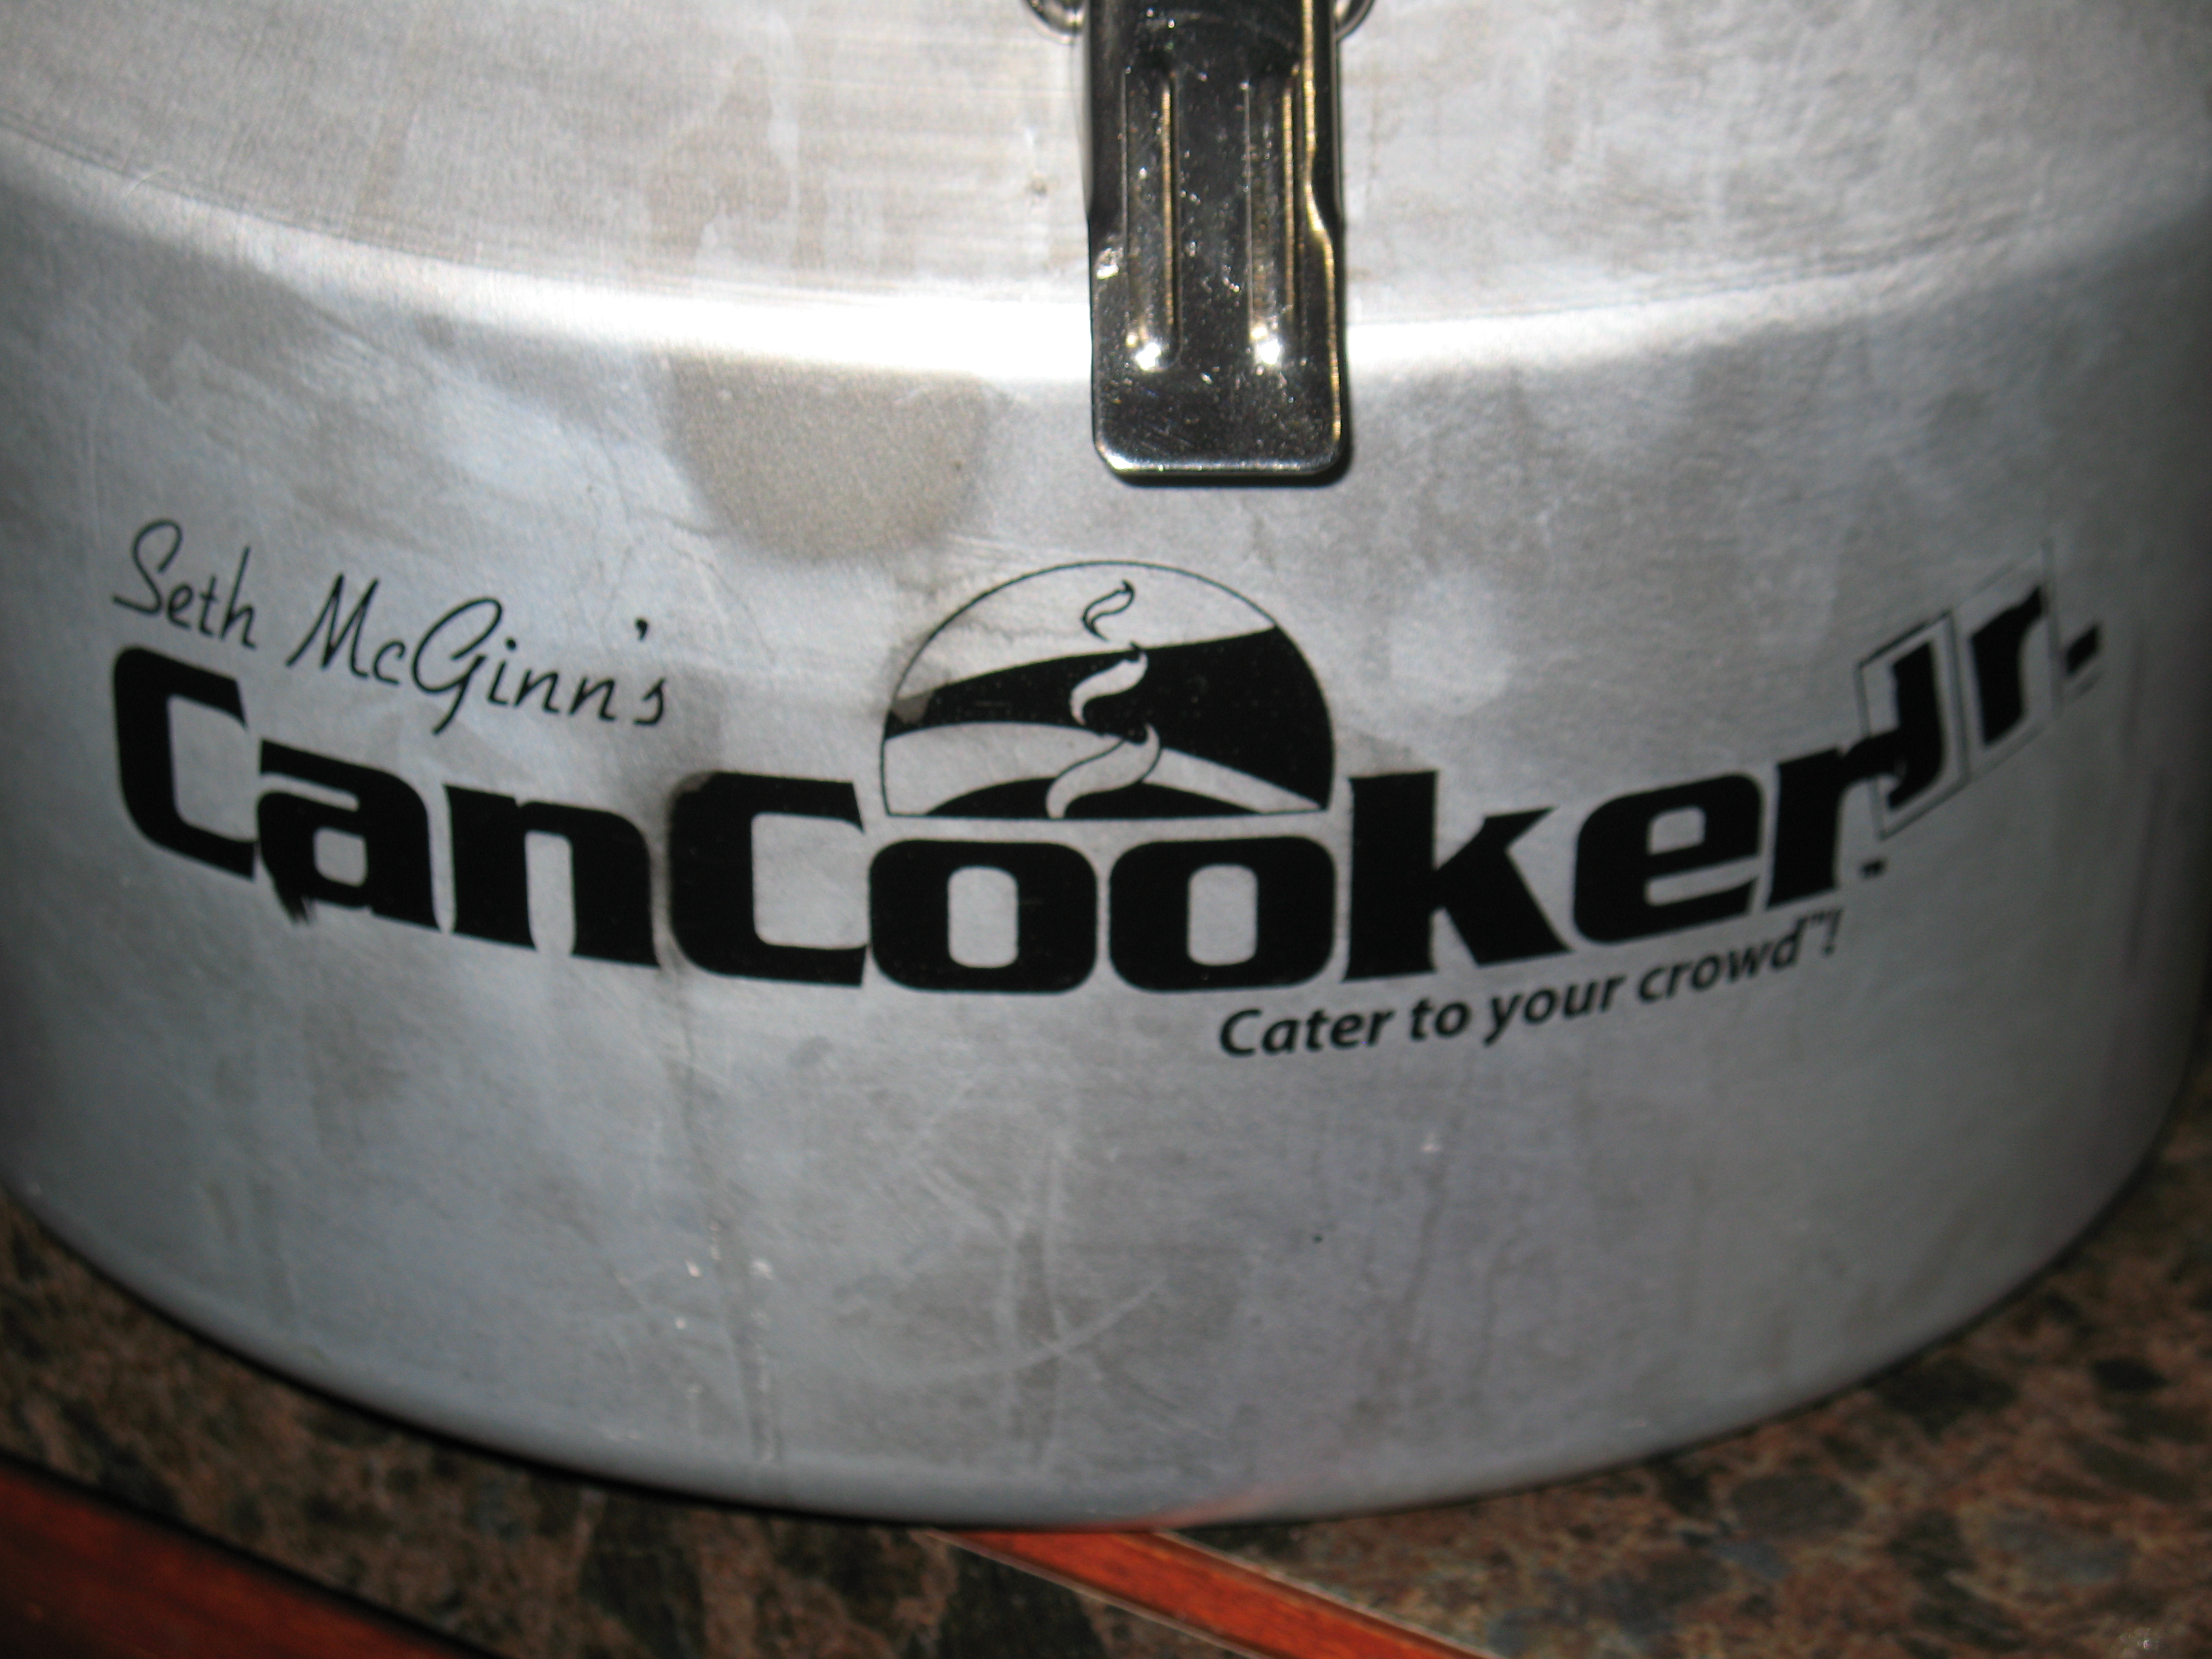 Seth McGinn's CanCooker - Cater to your Crowd!